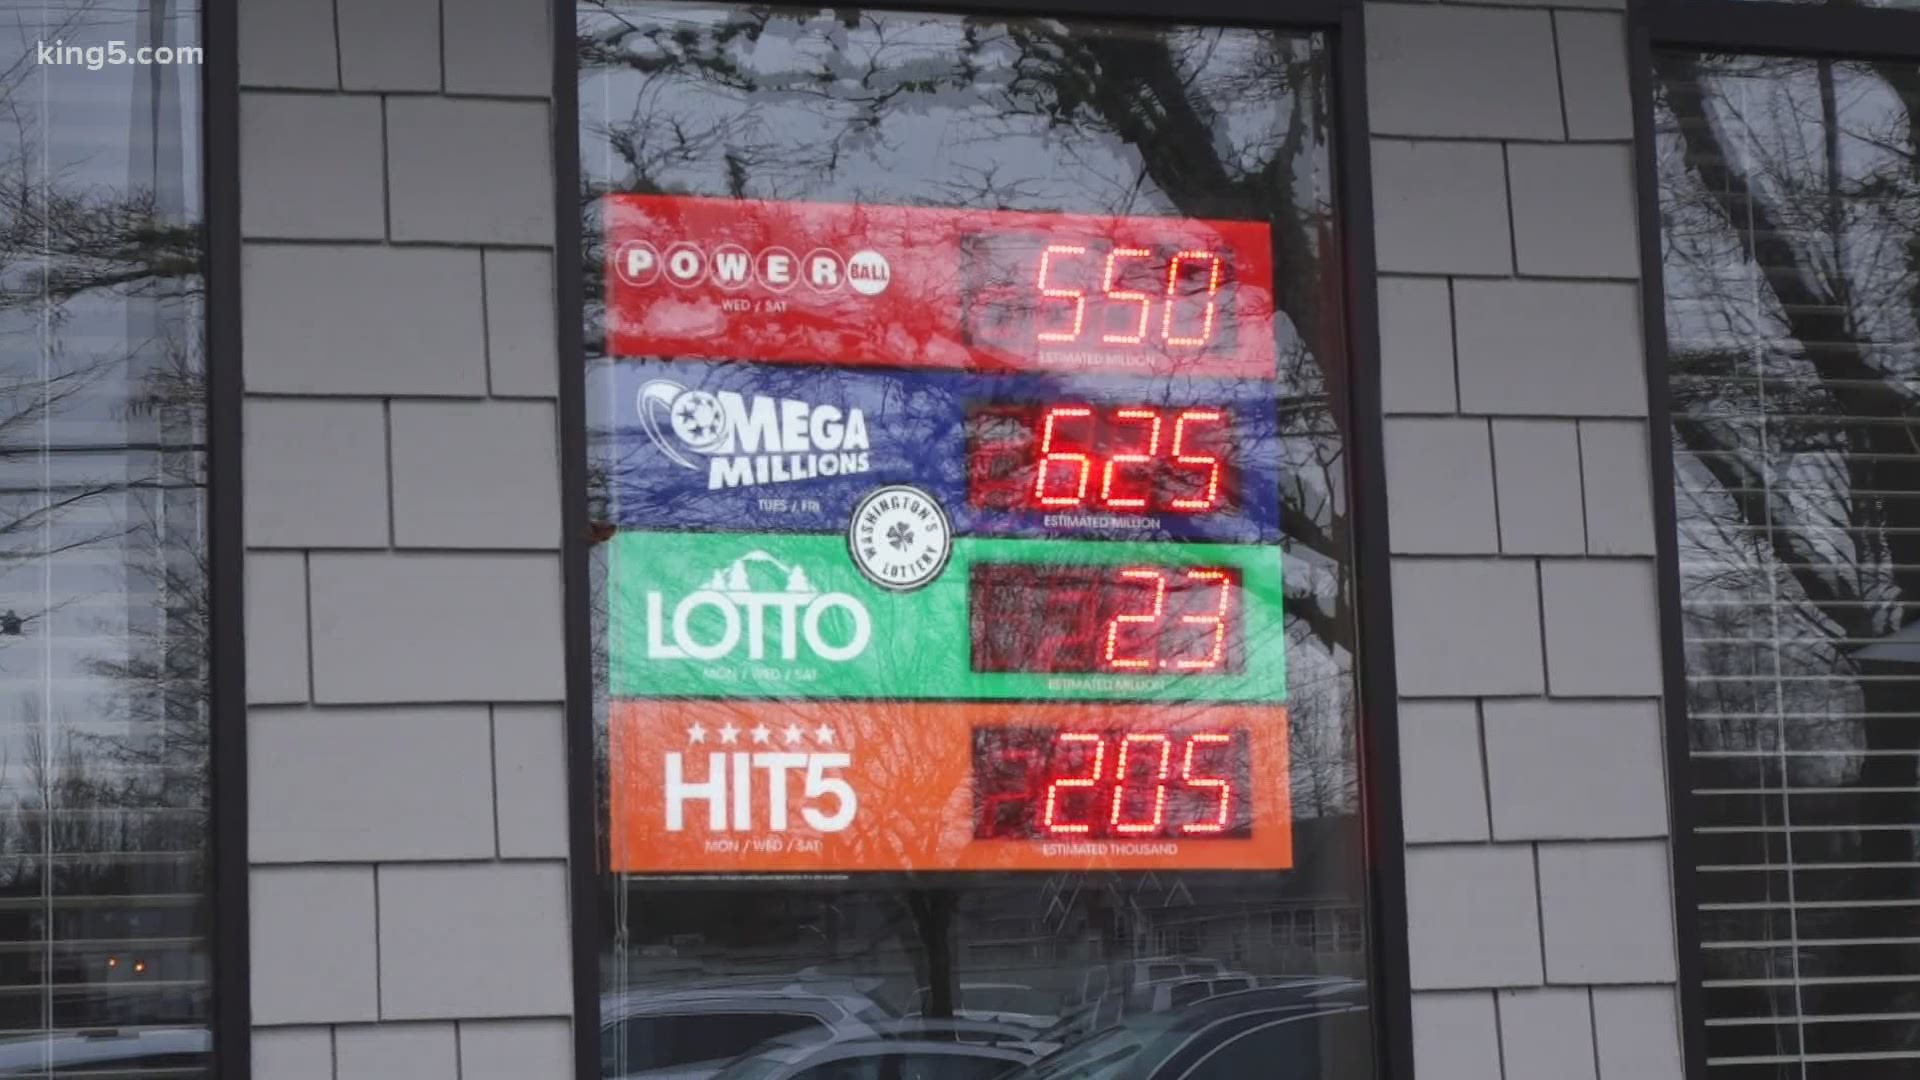 Powerball, Mega Millions both have jackpots of more than $500 million this week. Even if you don't win, some Washington state education programs get a boost.